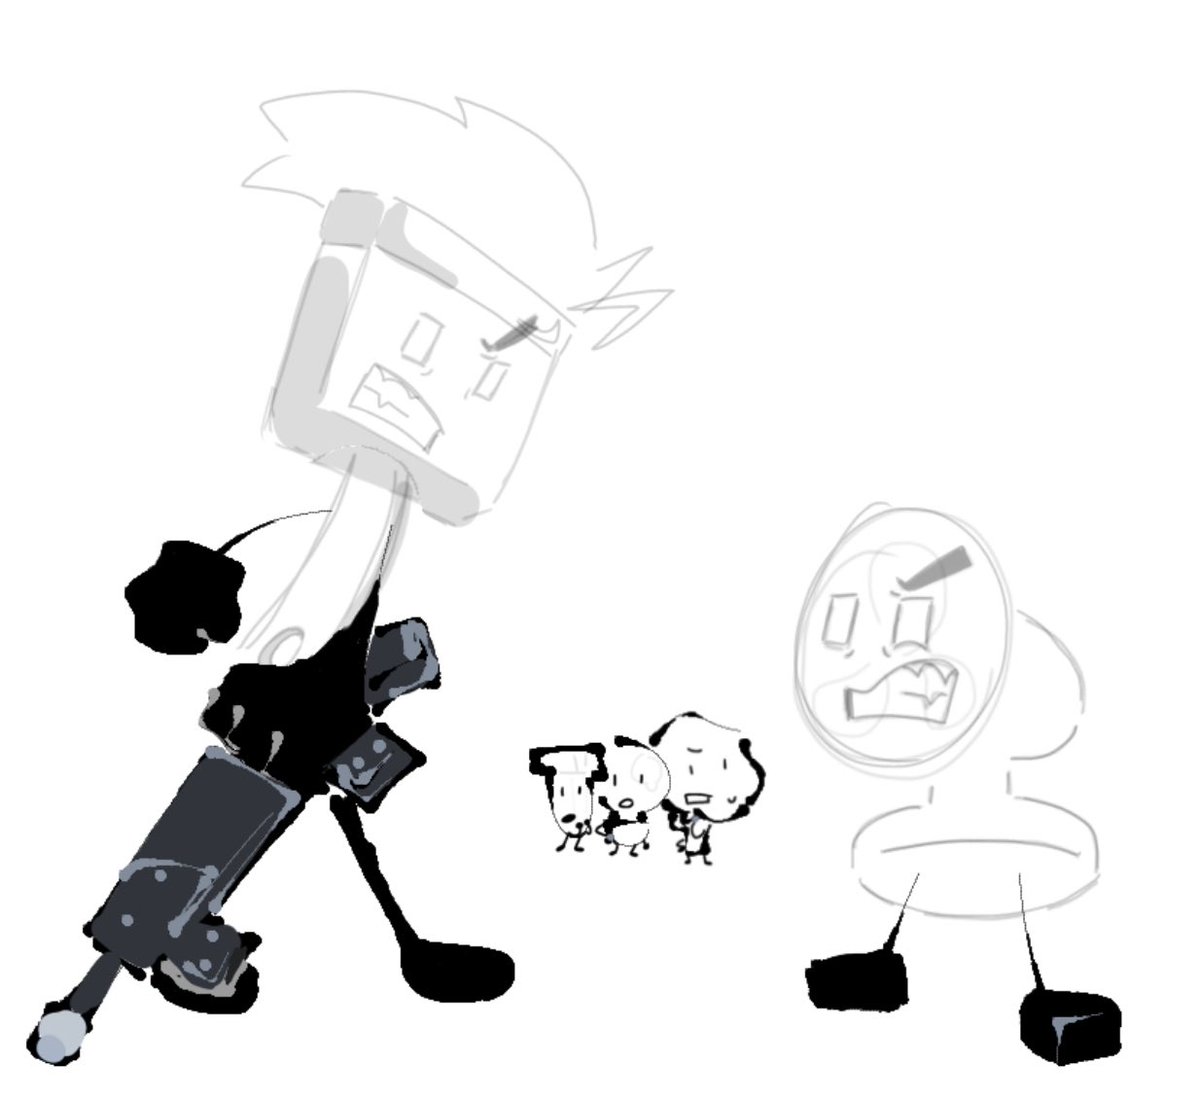 The Catfight fnf mod but with Paintbrush and Fanny. What r they beefing over u decide #osc #ii #bfb #fnf